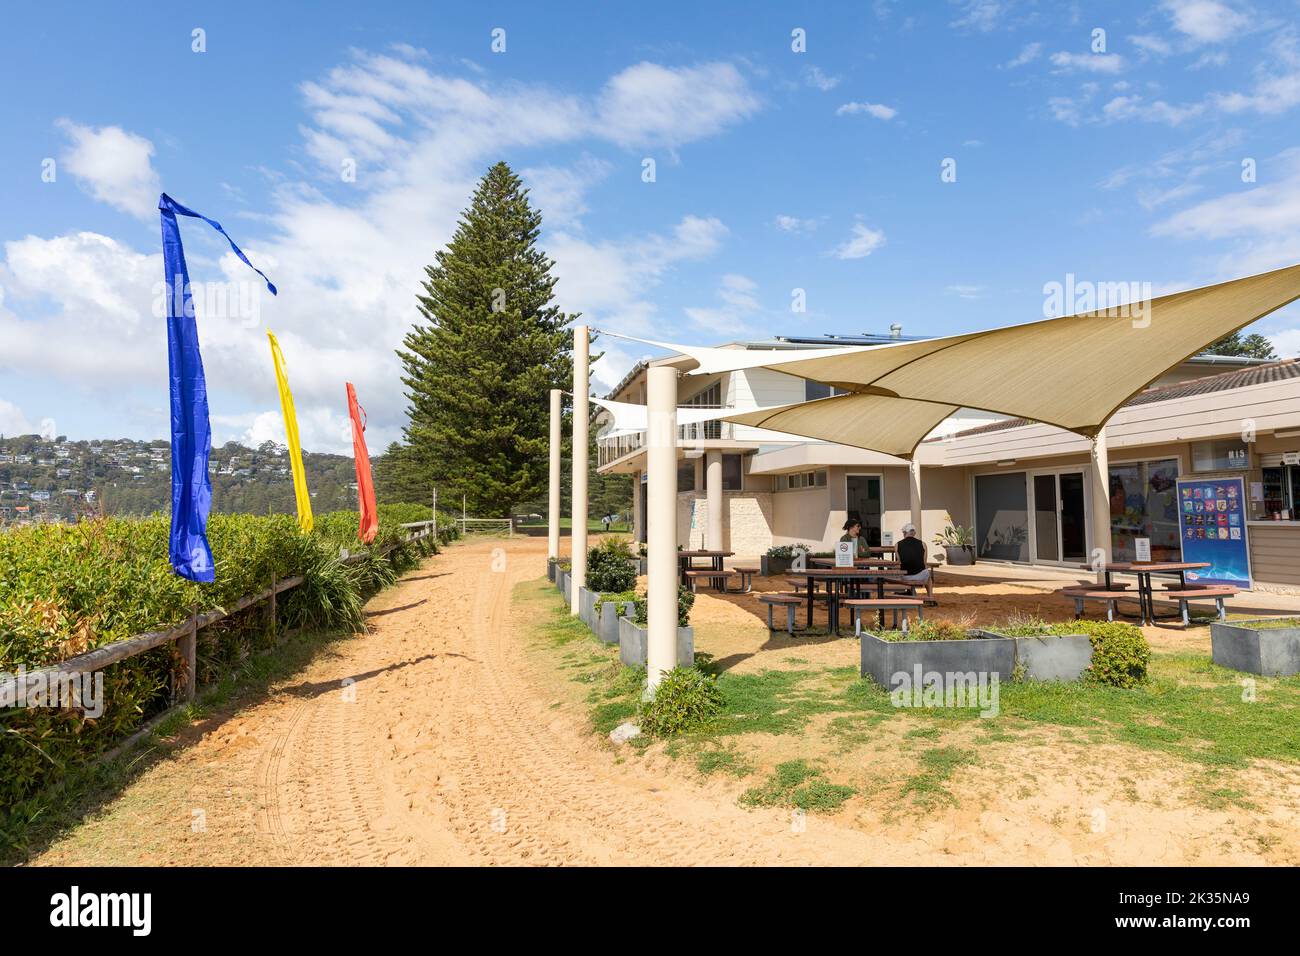 North Palm Beach surf club in Sydney, also known as Summer Bay surf club and food kiosk from the television Neighbours,NSW,Australia Stock Photo